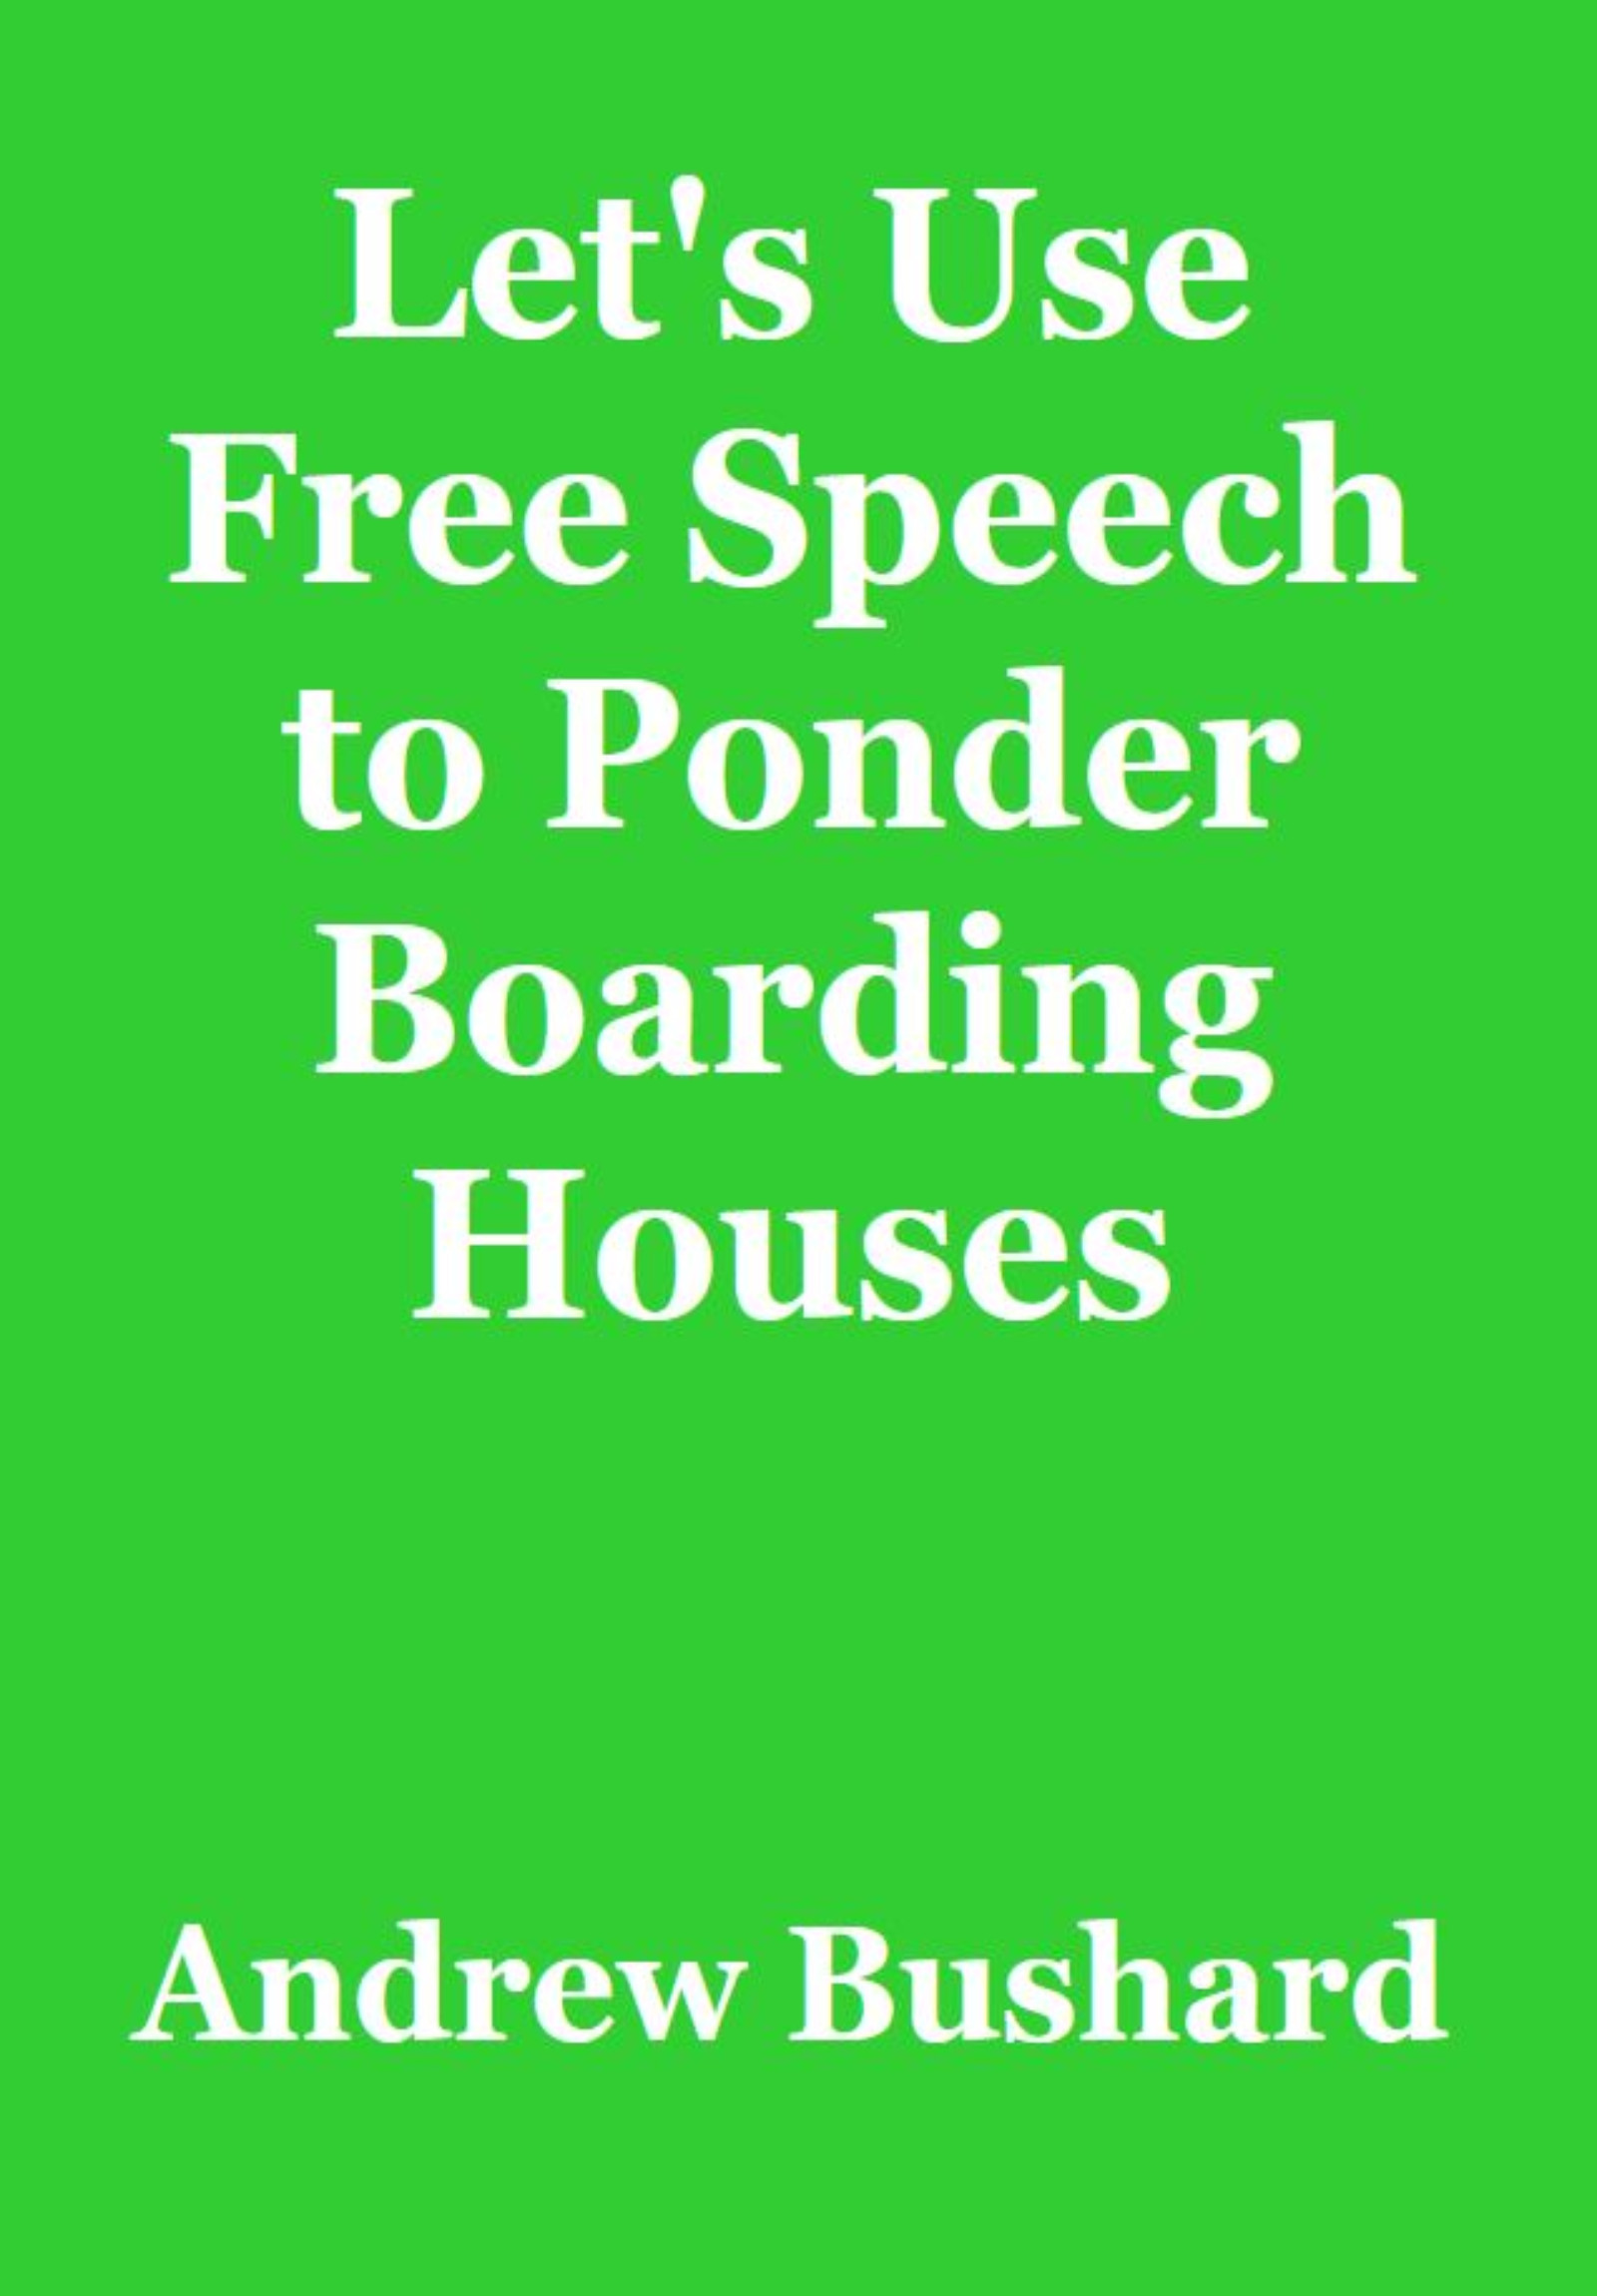 Let's Use Free Speech to Ponder Boarding Houses's featured image